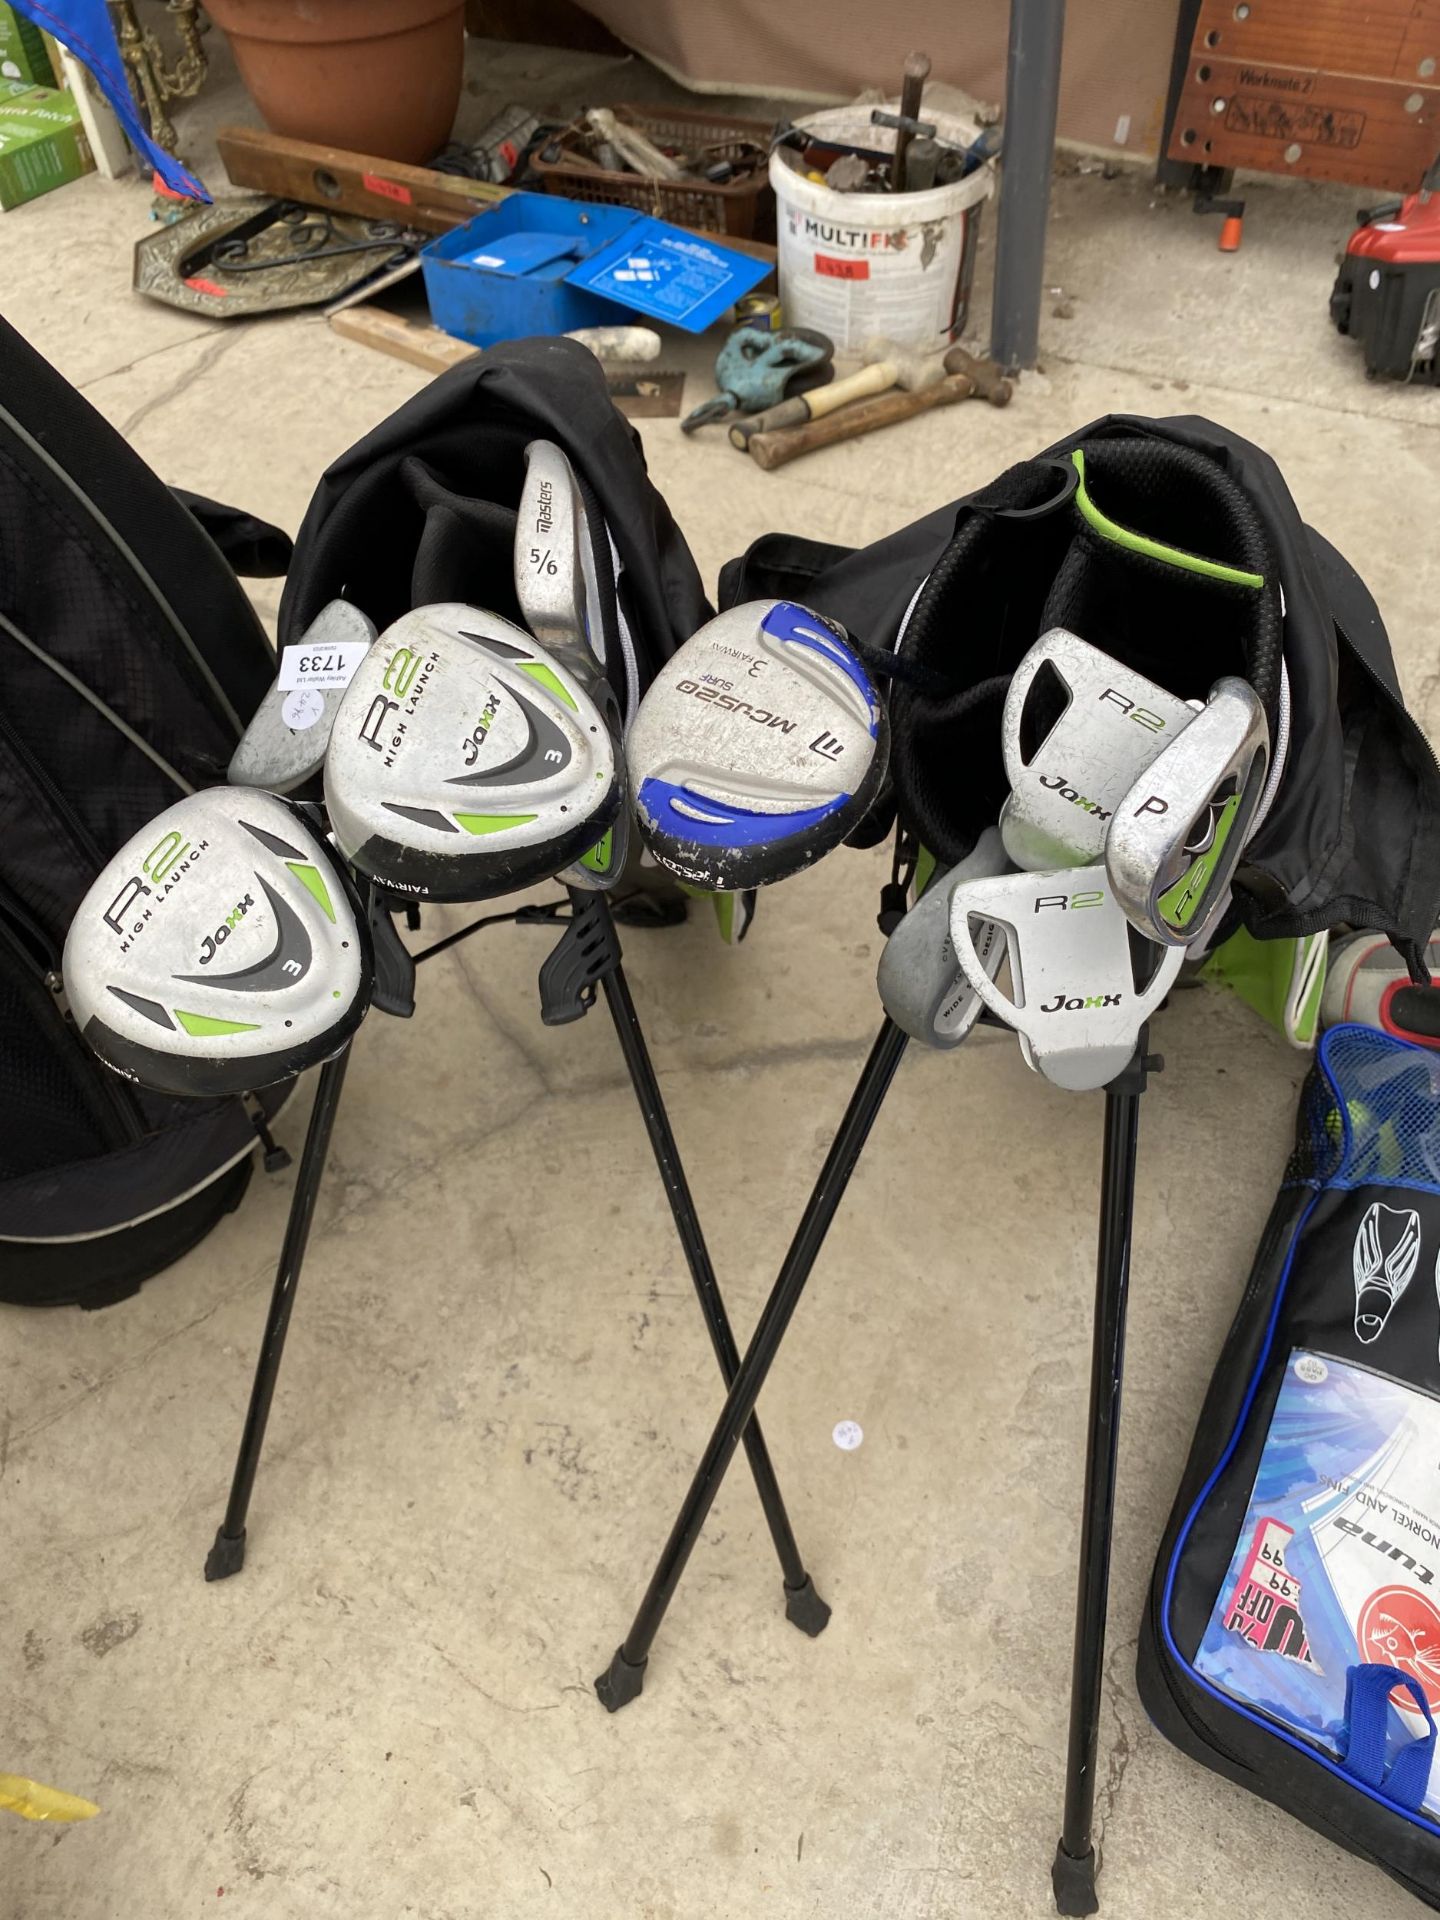 TWO CHILDRENS GOLF BAGS AND AN ASSORTMENT OF CHILDRENS GOLF CLUBS - Image 2 of 4